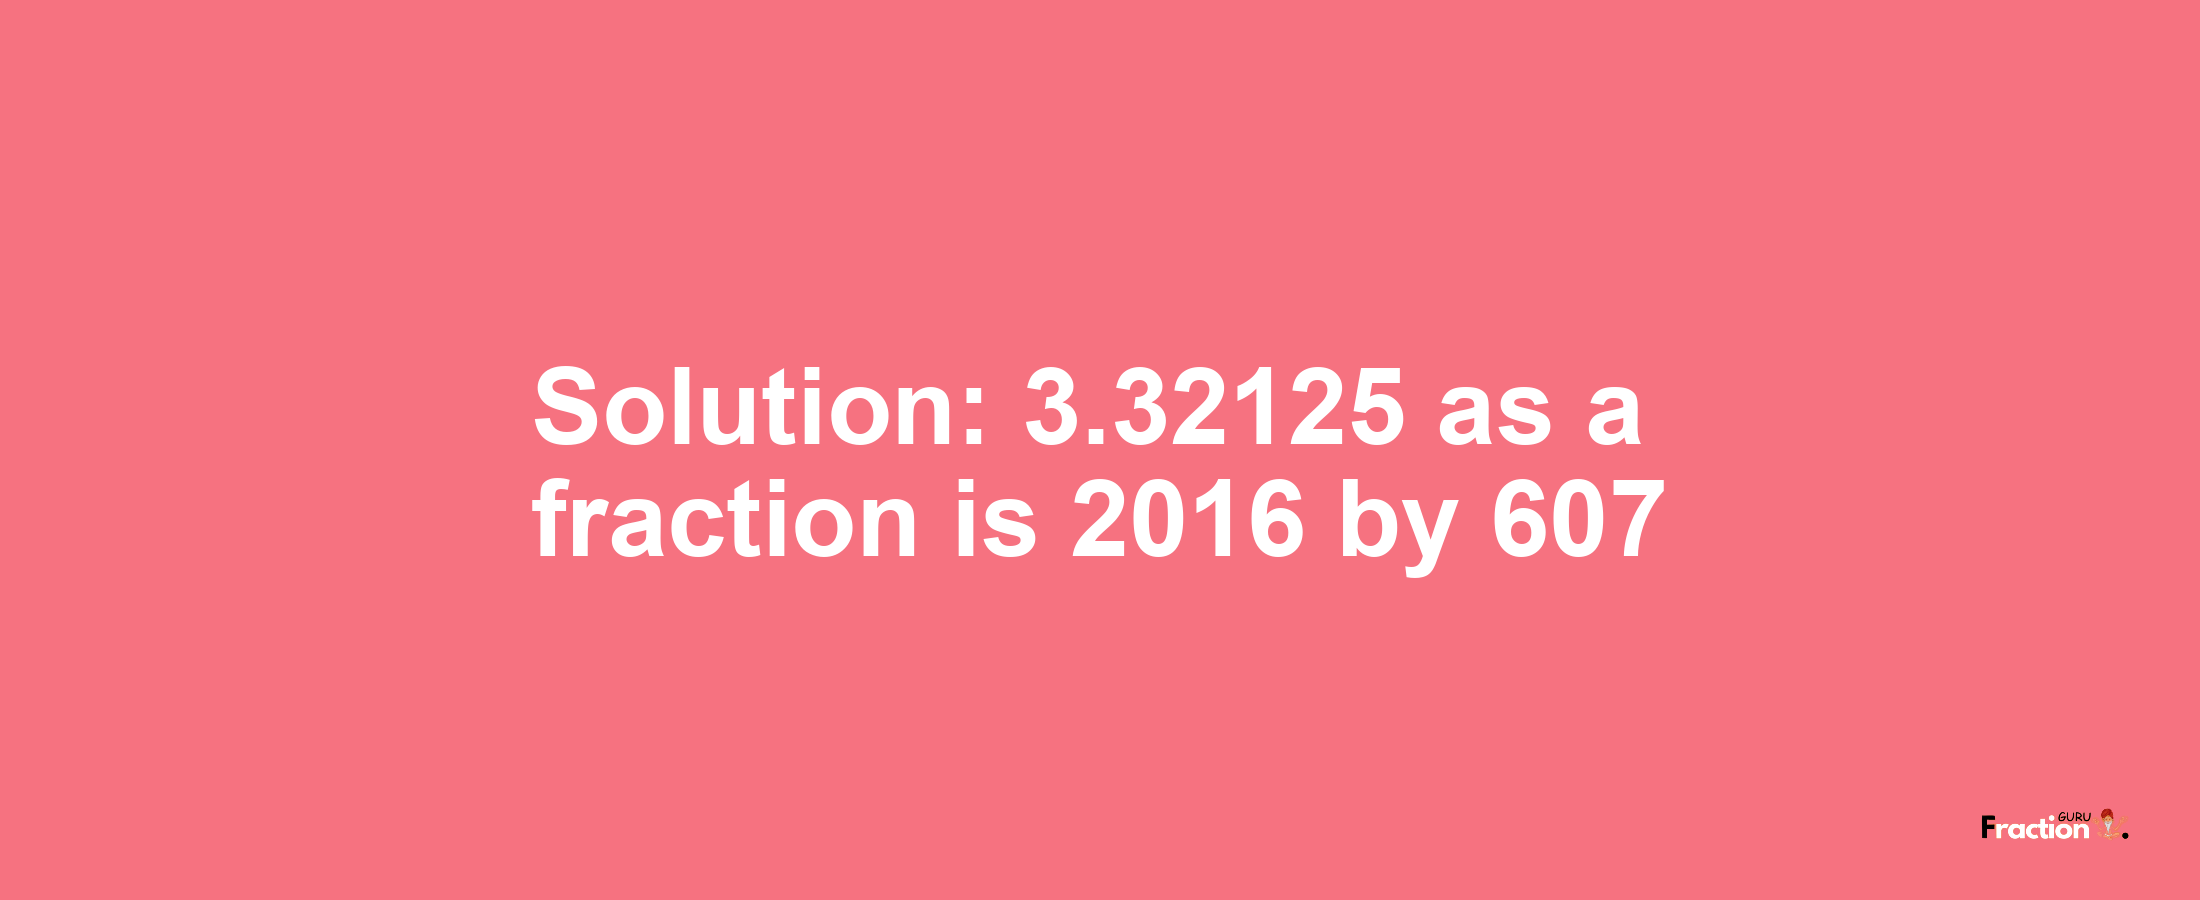 Solution:3.32125 as a fraction is 2016/607